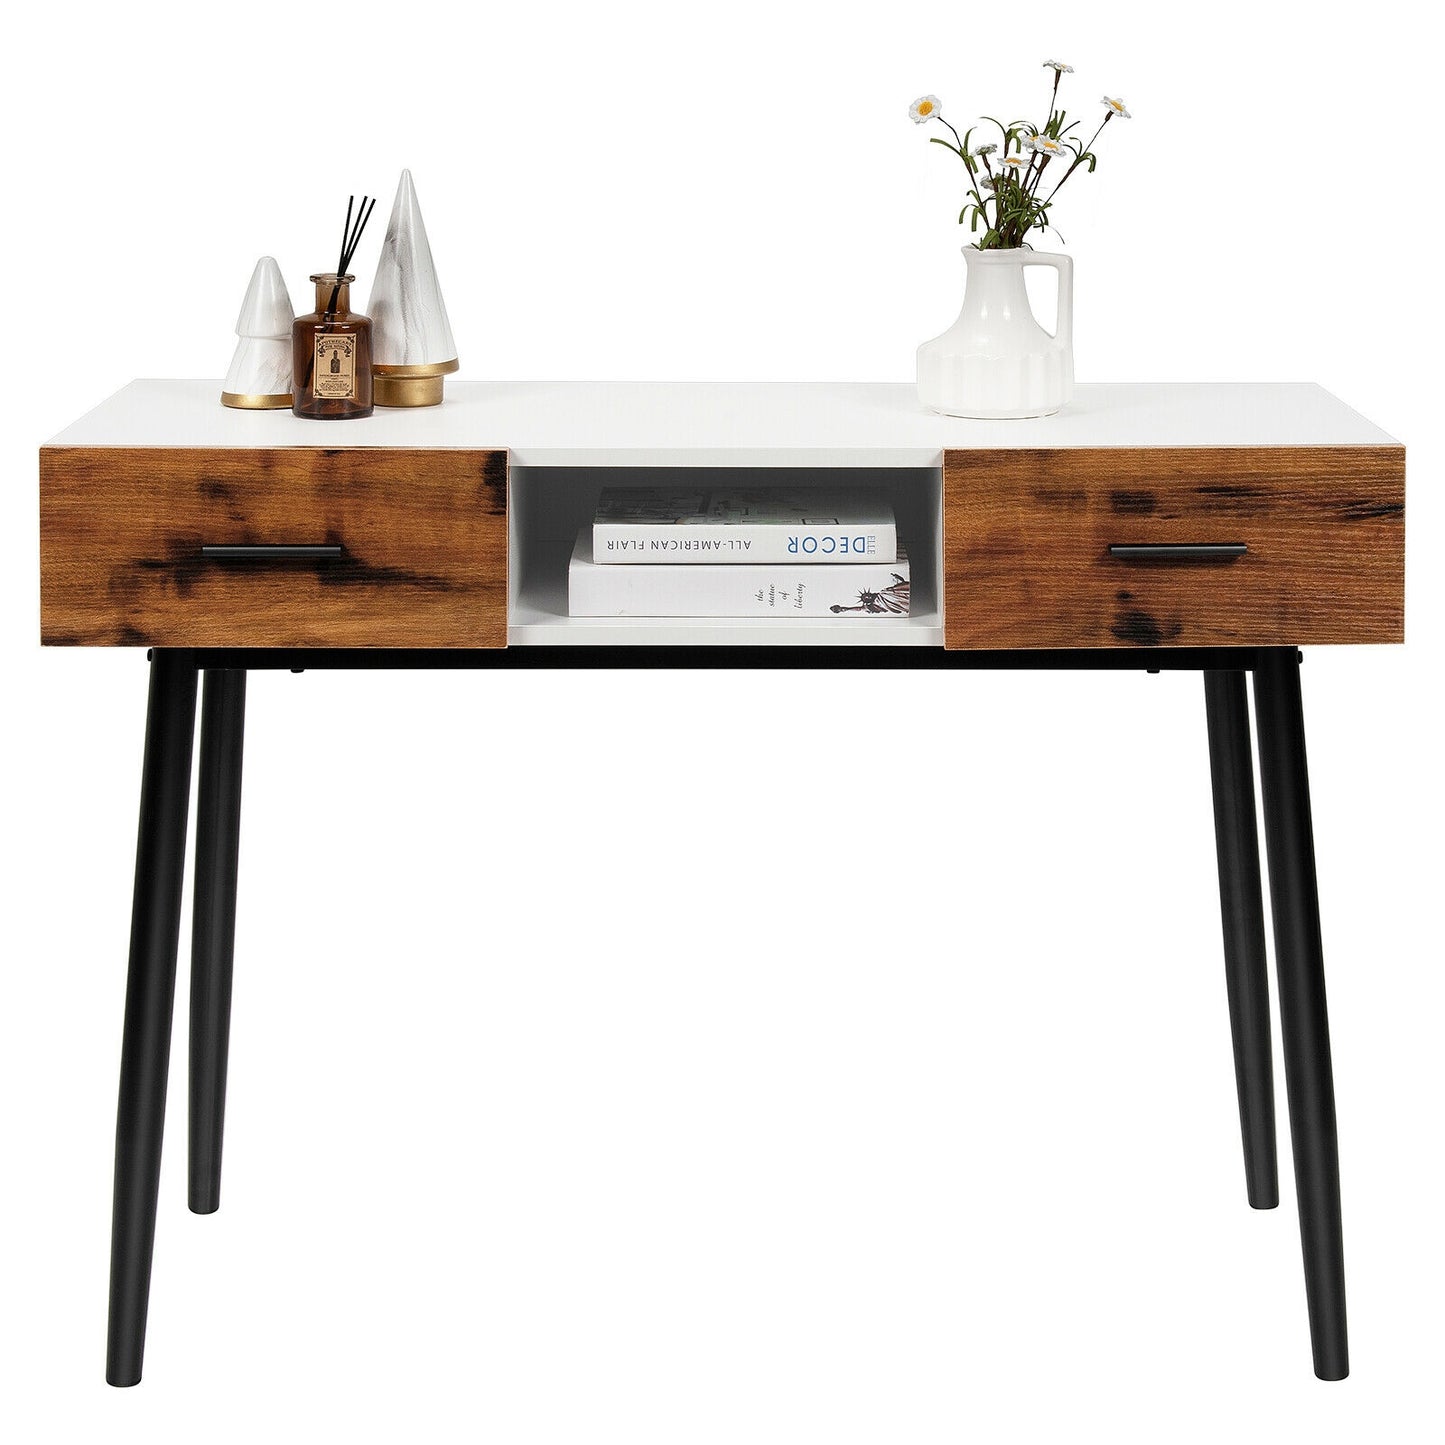 42 Inch Industrial Console Table with 2 Drawers for Entryway Hallway